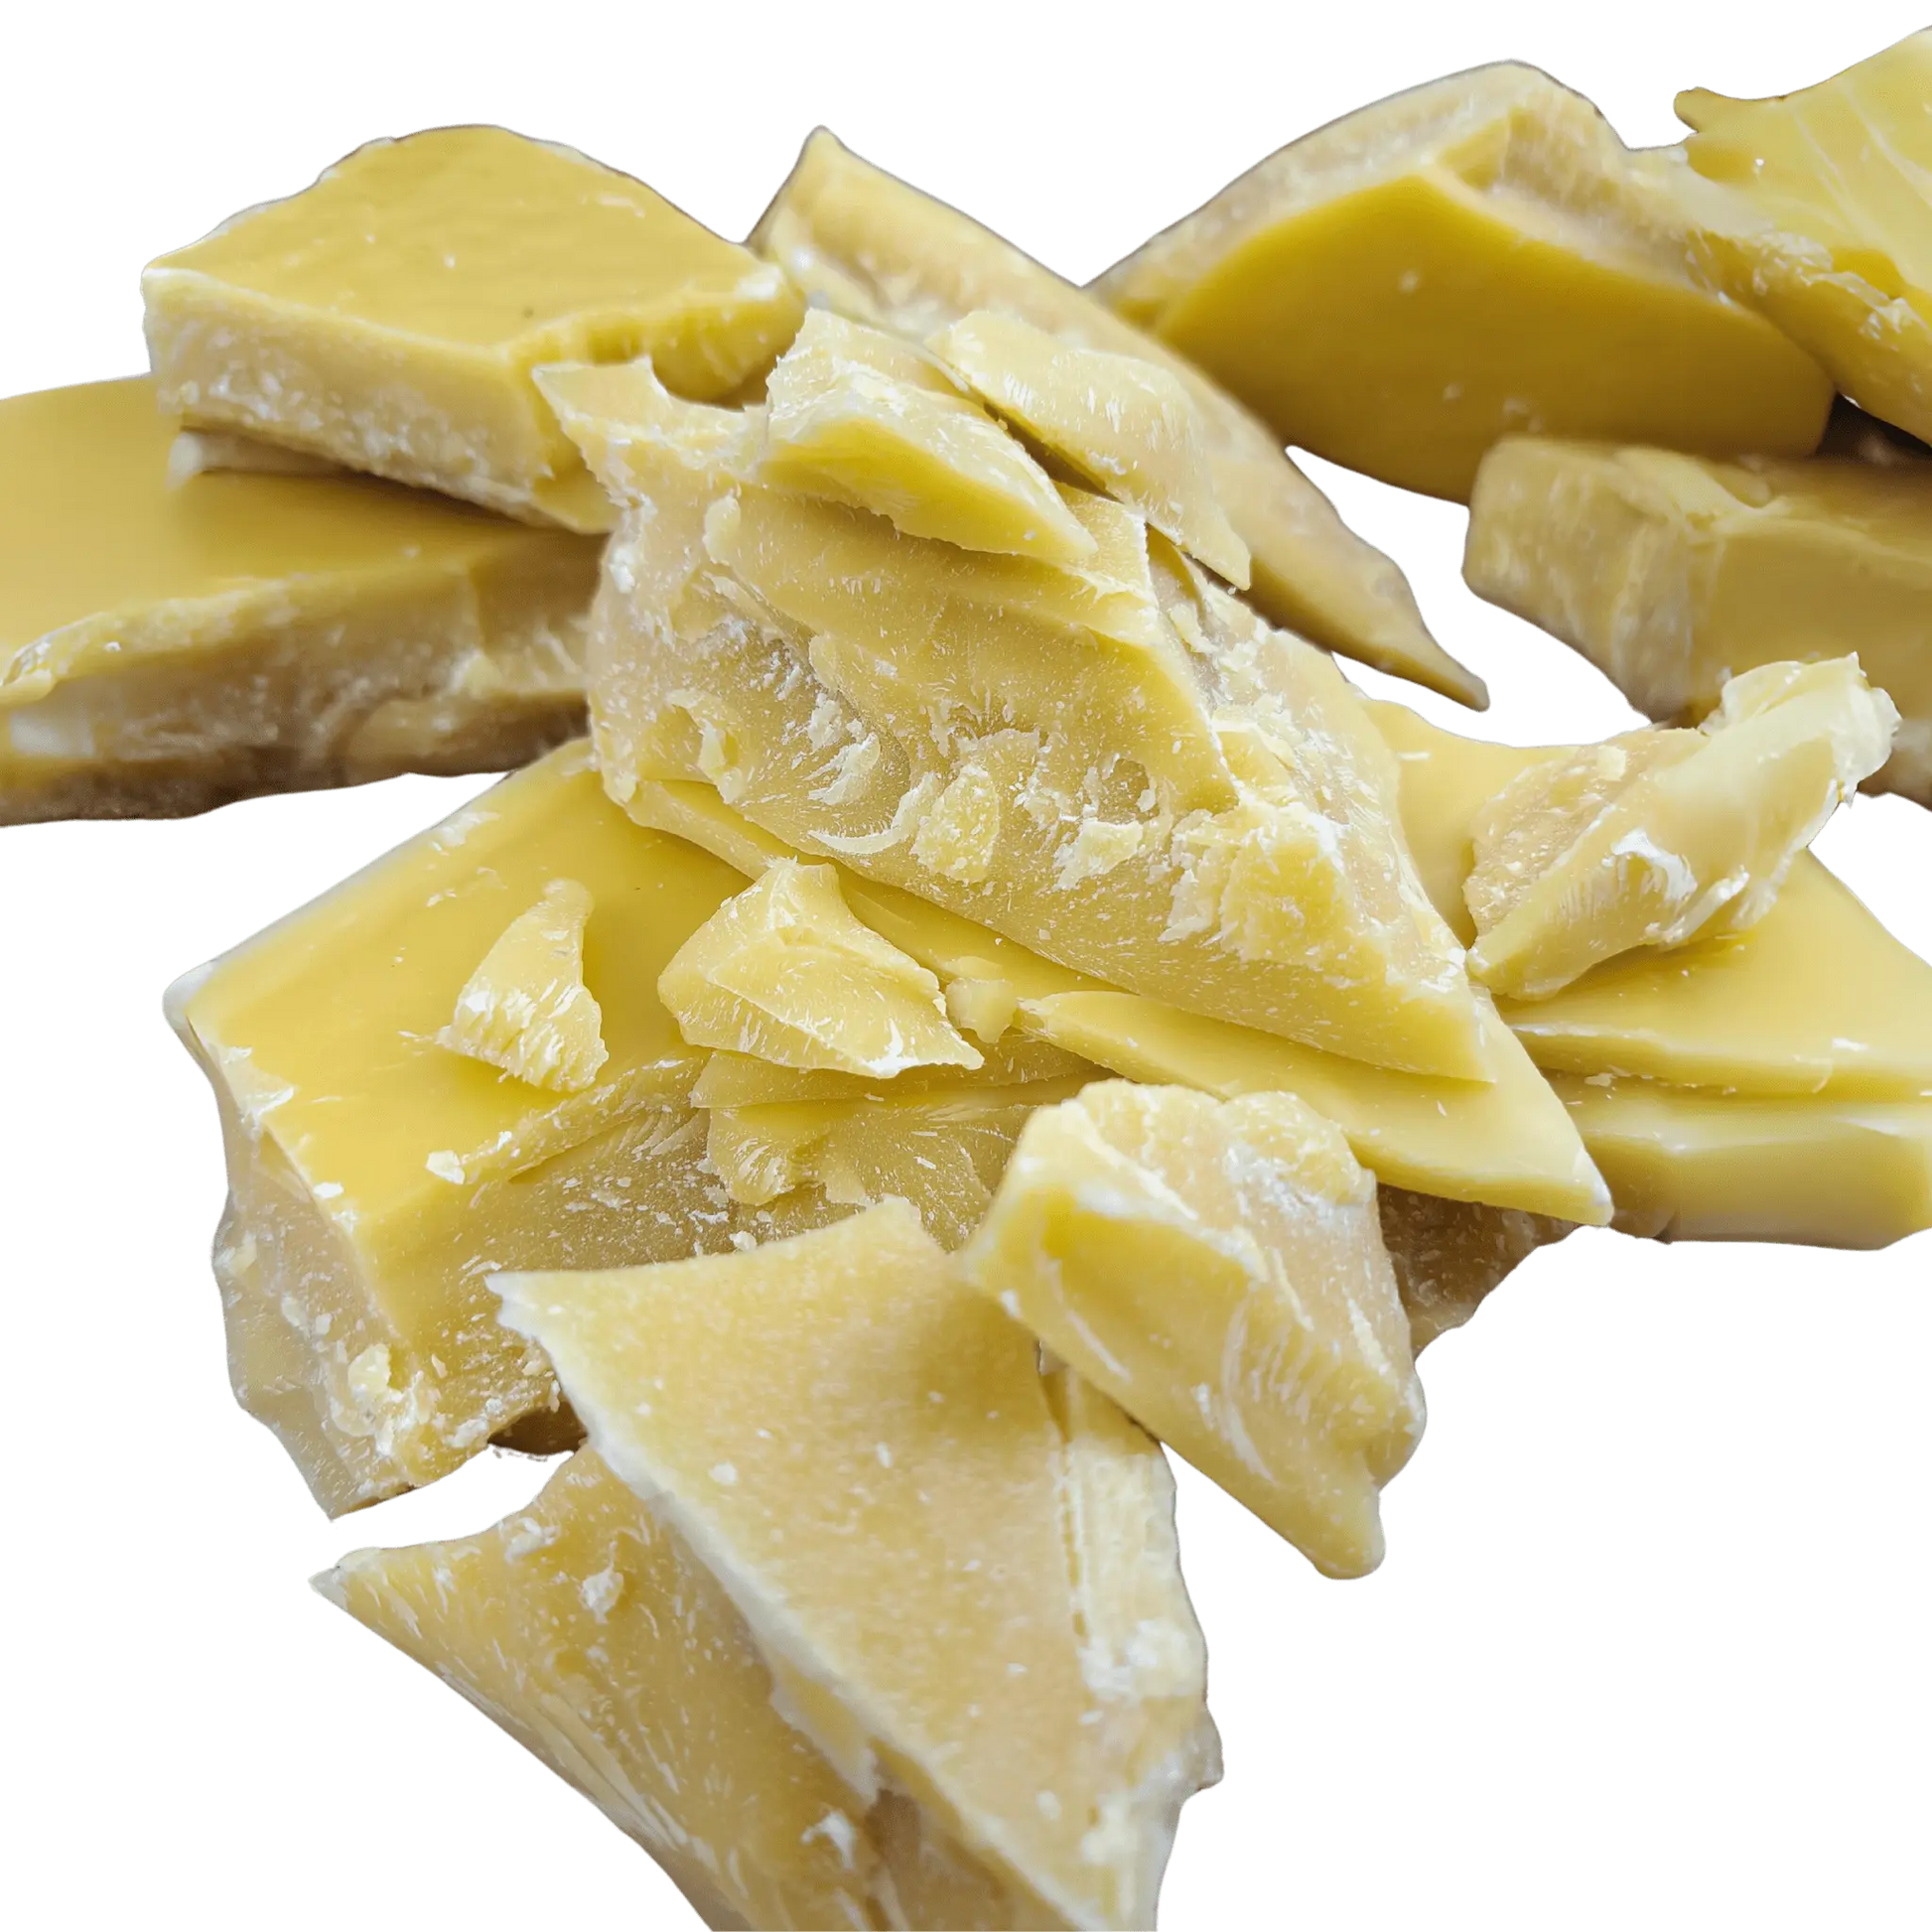 100% pure natural yellow beeswax blocks from British beekeepers, ready for eco-friendly crafts, candle making, beeswax wraps, and natural polishing, showcased on a sustainable wooden surface